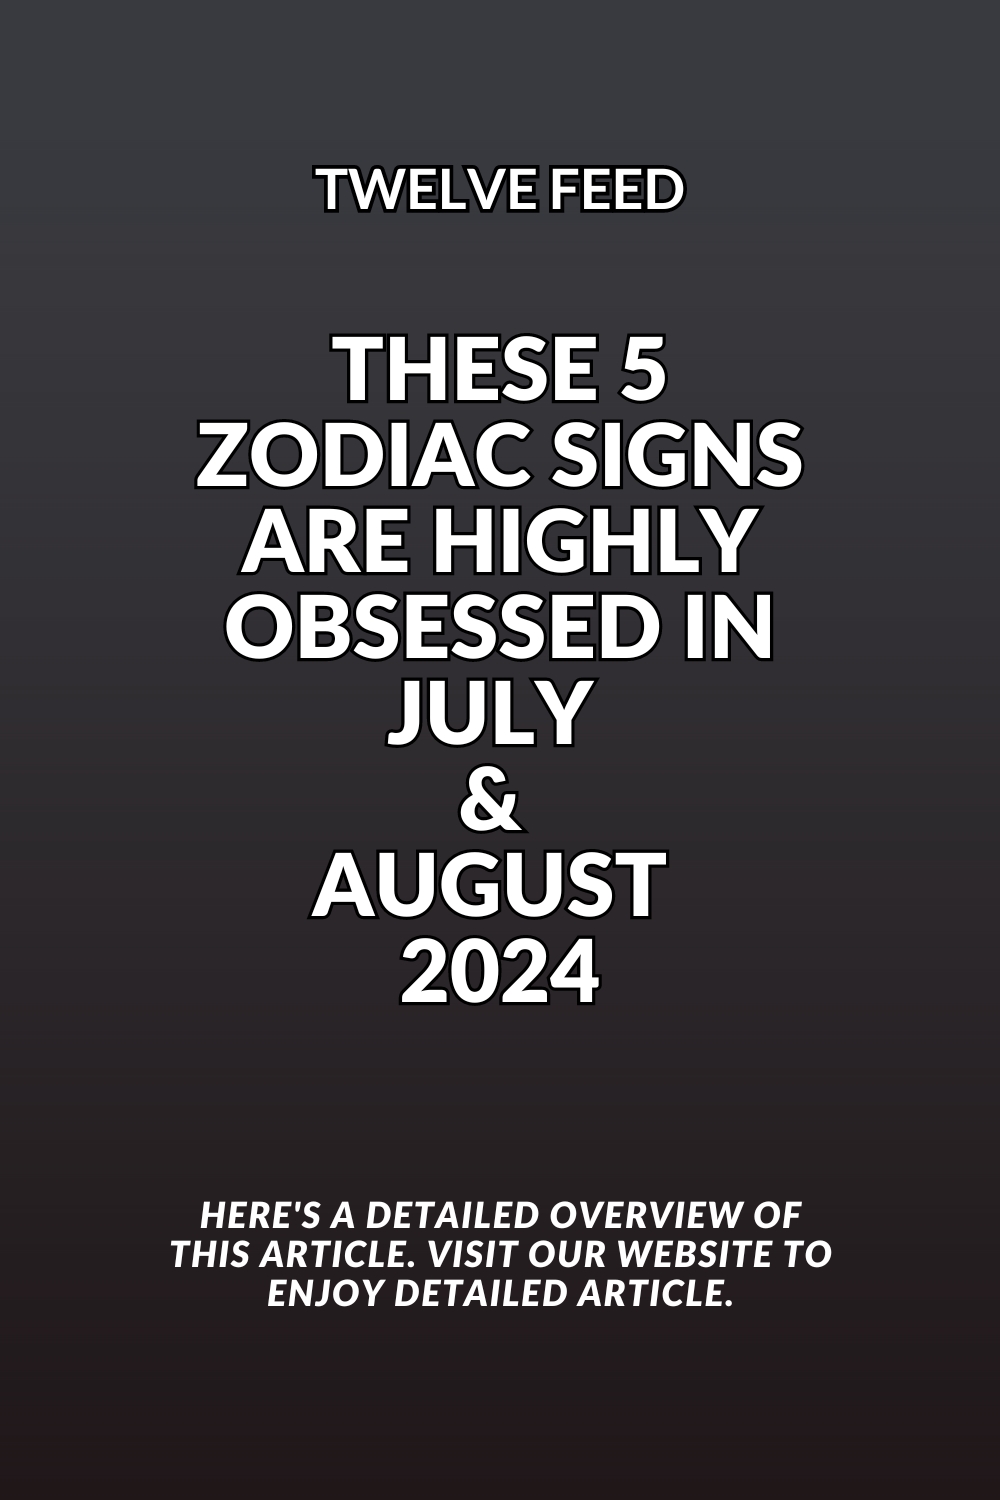 These 5 Zodiac Signs Are Highly Obsessed In July & August 2024